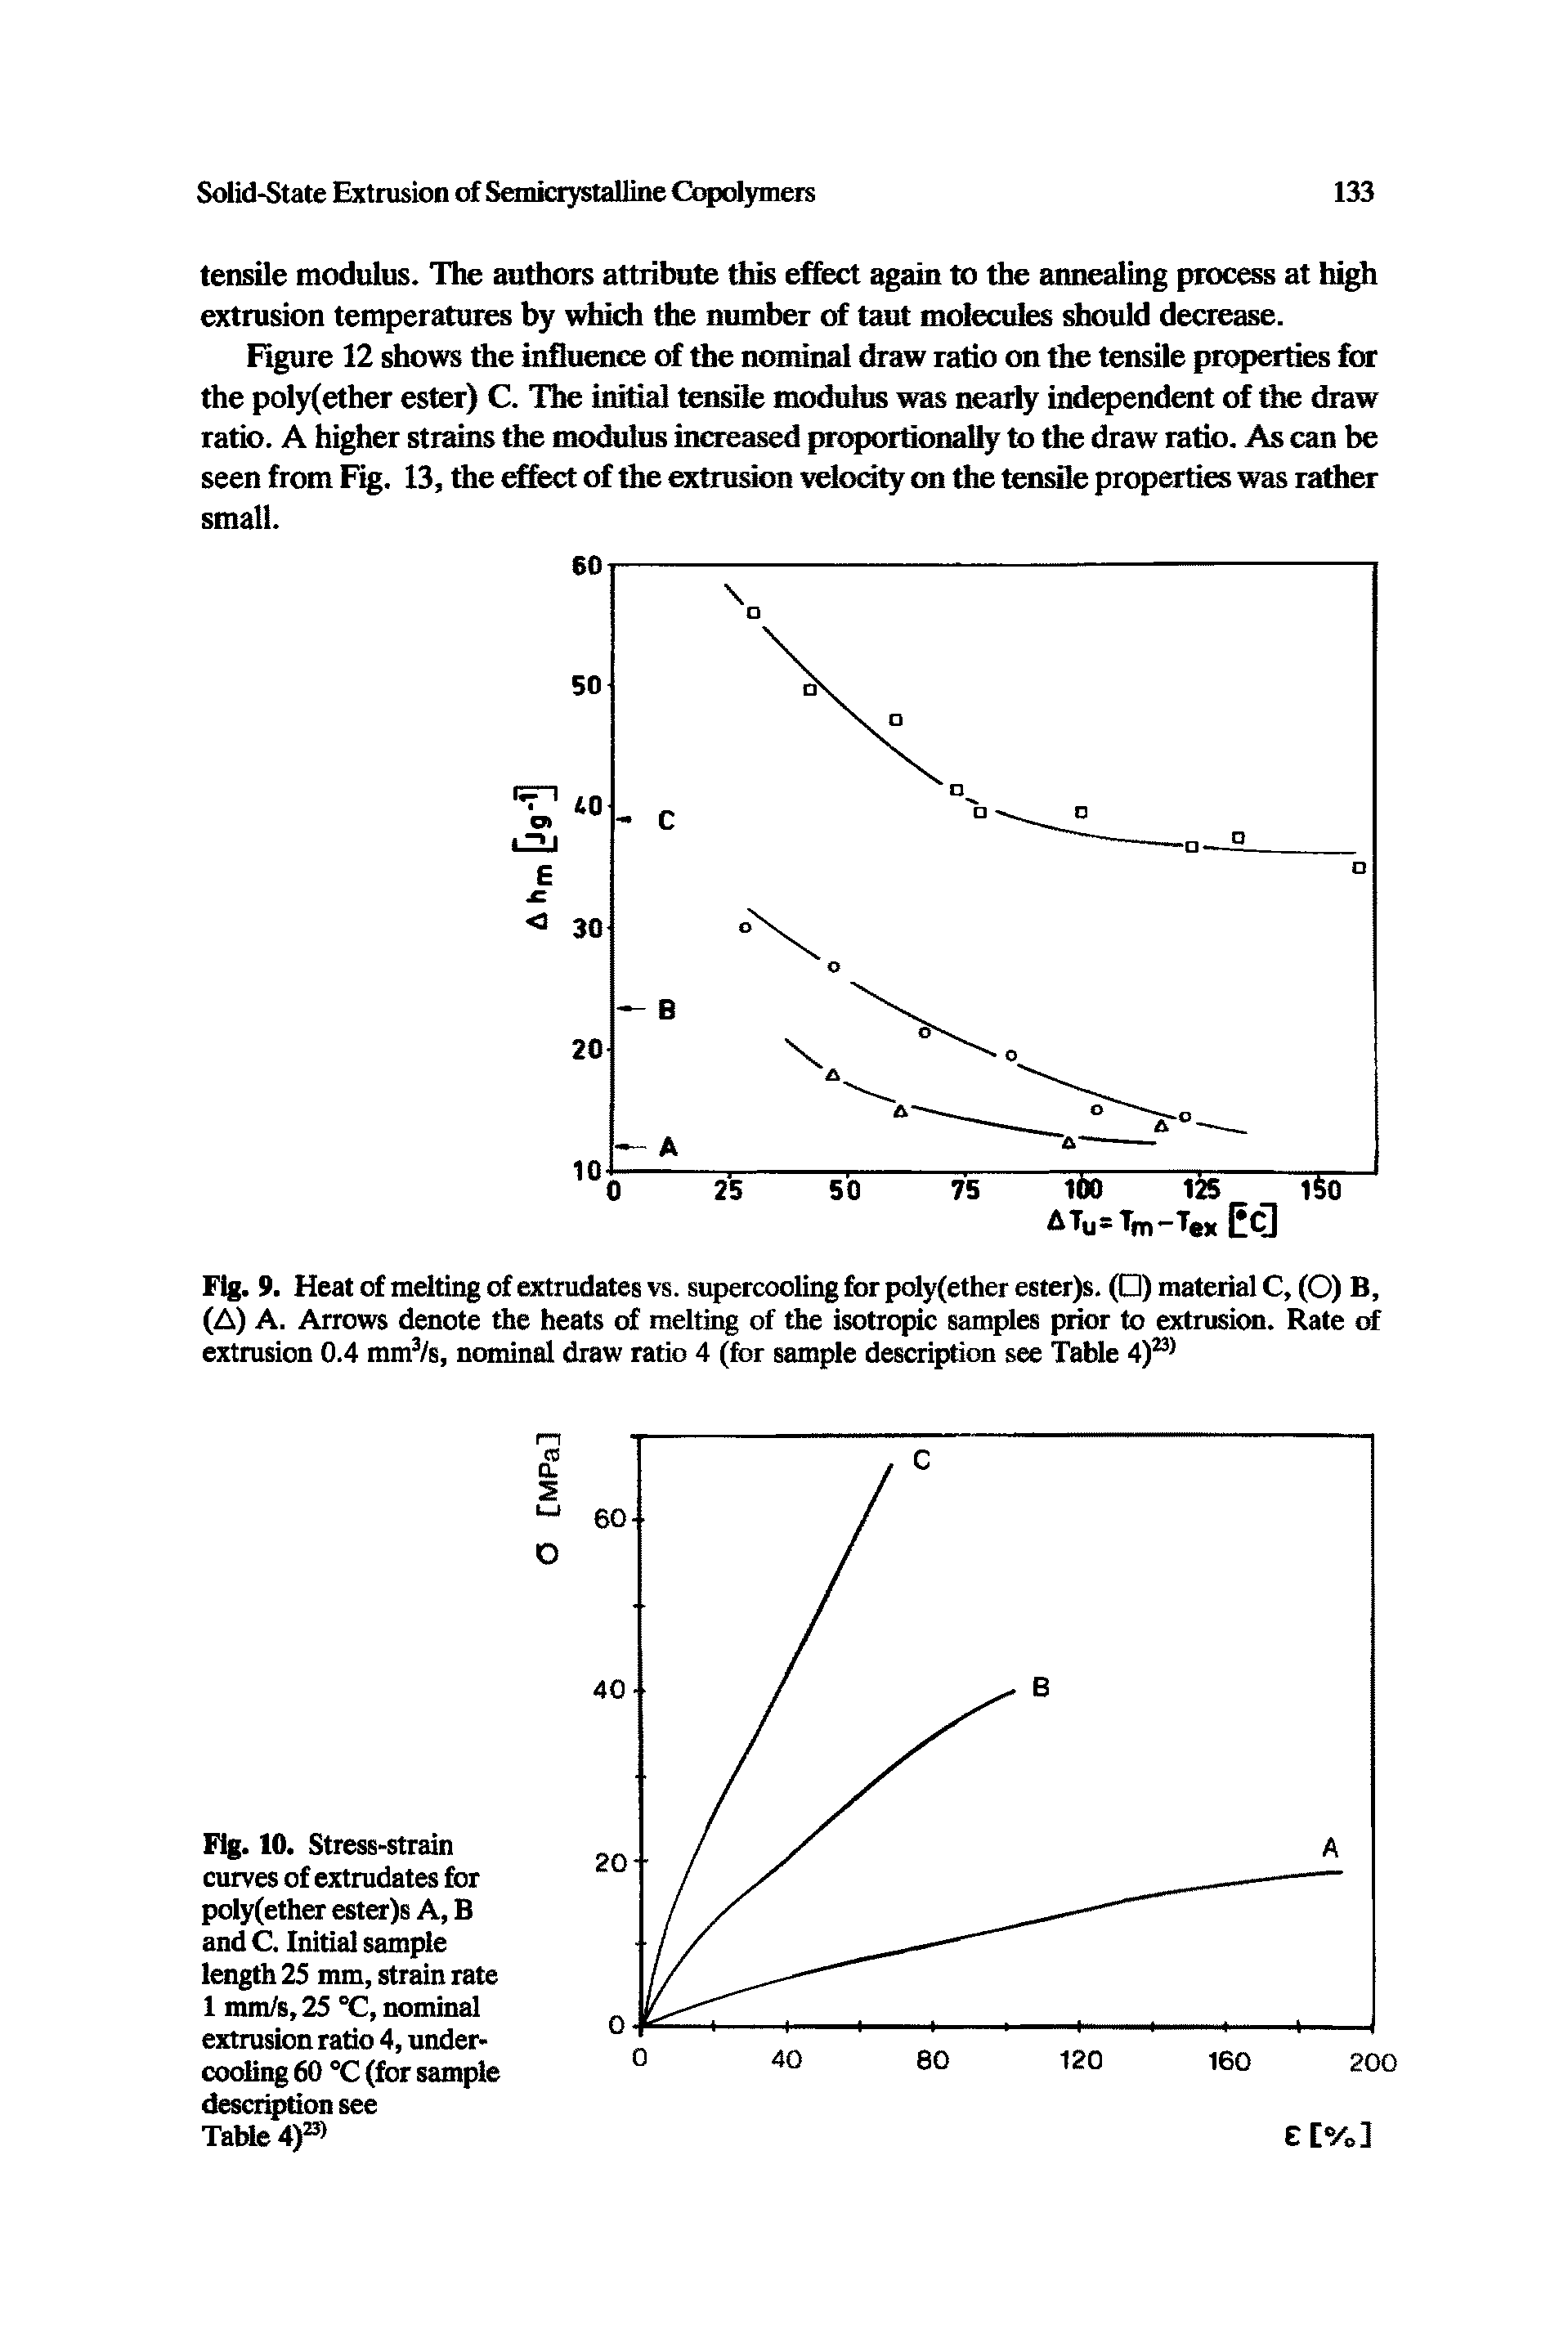 Fig. 10. Stress-strain curves of extrudates for poly(ether ester)s A, B and C. Initial sample length 25 mm, strain rate 1 mm/s, 25 °C, nominal extrusion ratio 4, undercooling 60 °C (for sample description see Table 4) >...